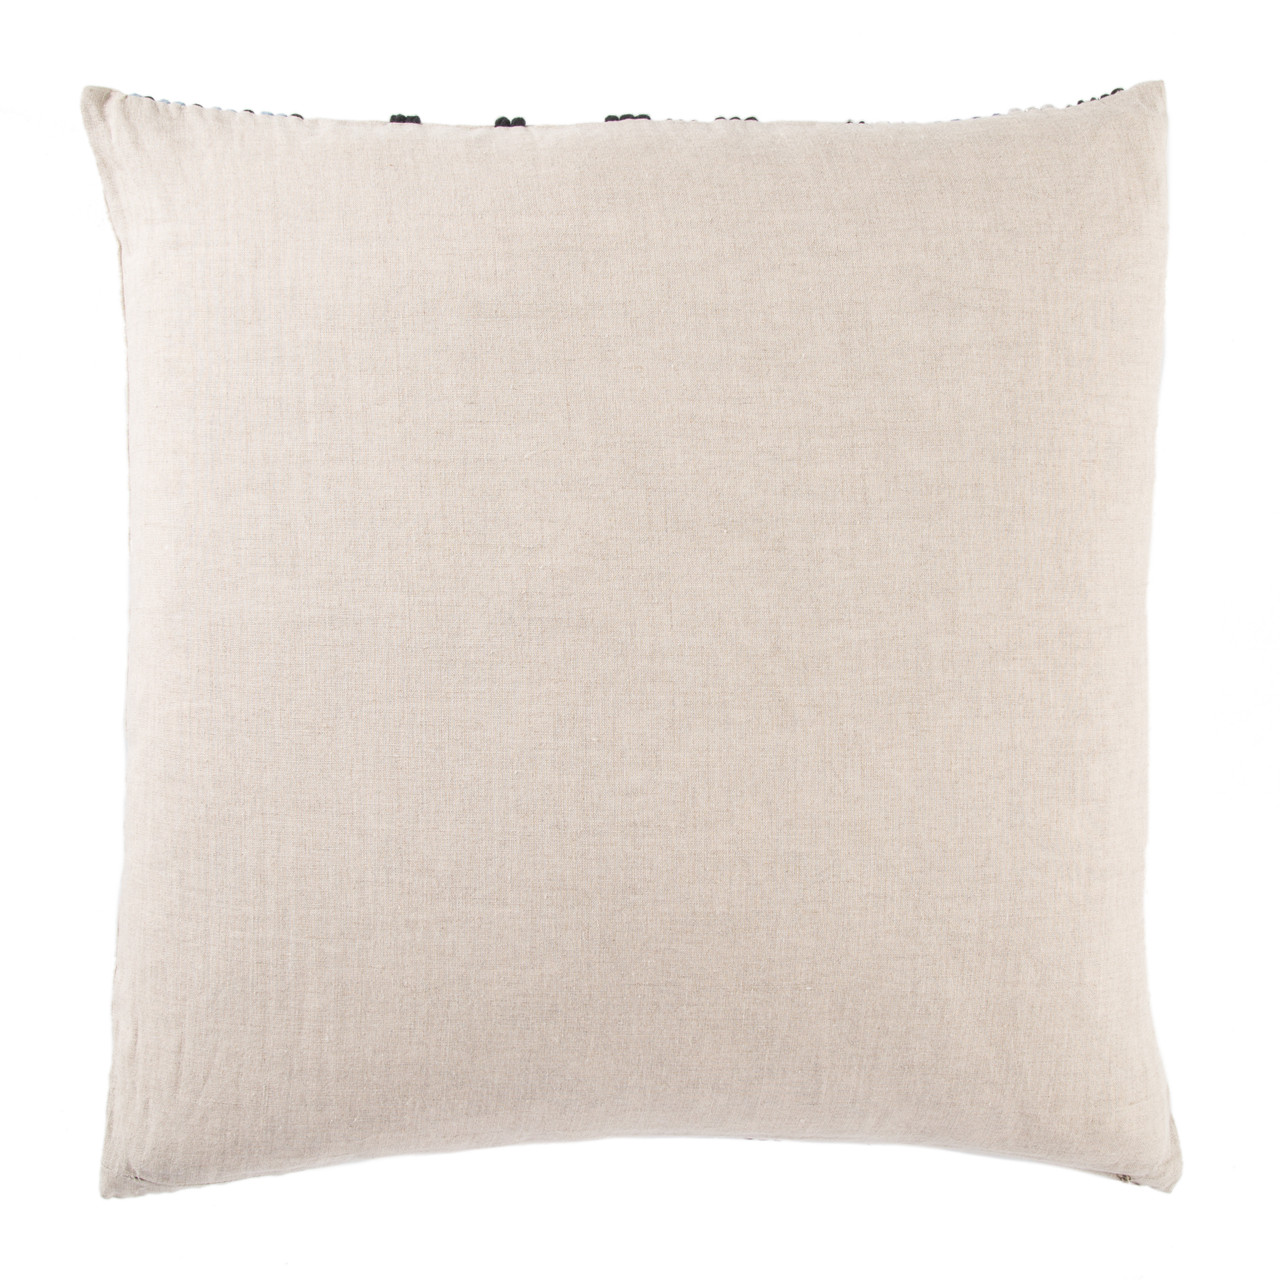 Magnolia Home by Joanna Gaines Grey / Ivory Pillow P0460 22 x 22 Cover w/Down